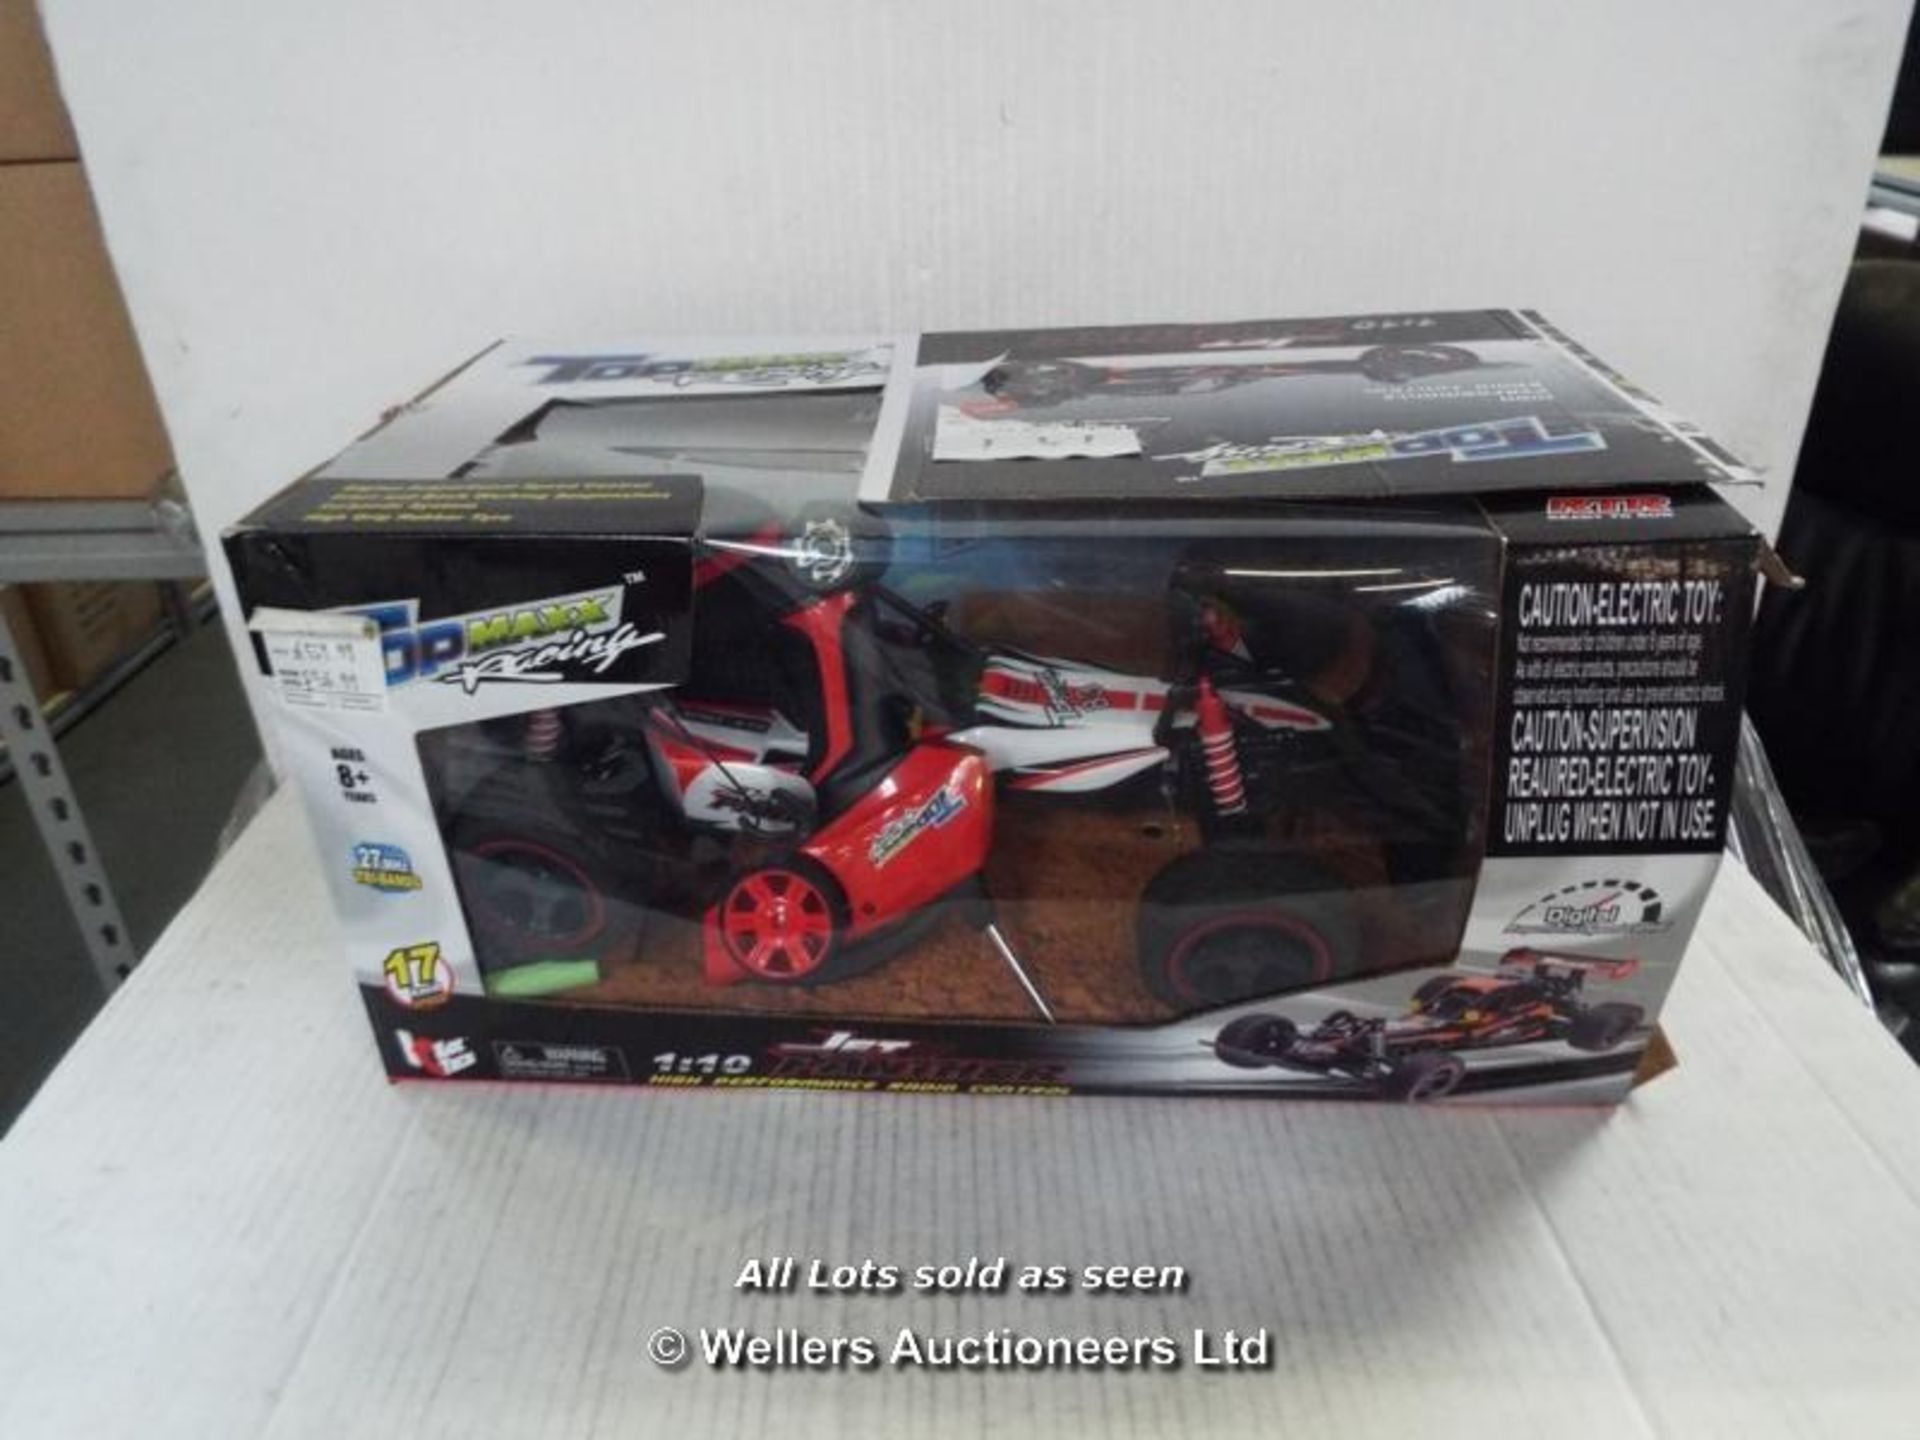 RADIO CONTROLLED JET PANTHER ELECTRIC OFF-ROAD BUGGY 1:10 N86DQ / GRADE: RETURNS / BOXED (DC3) [